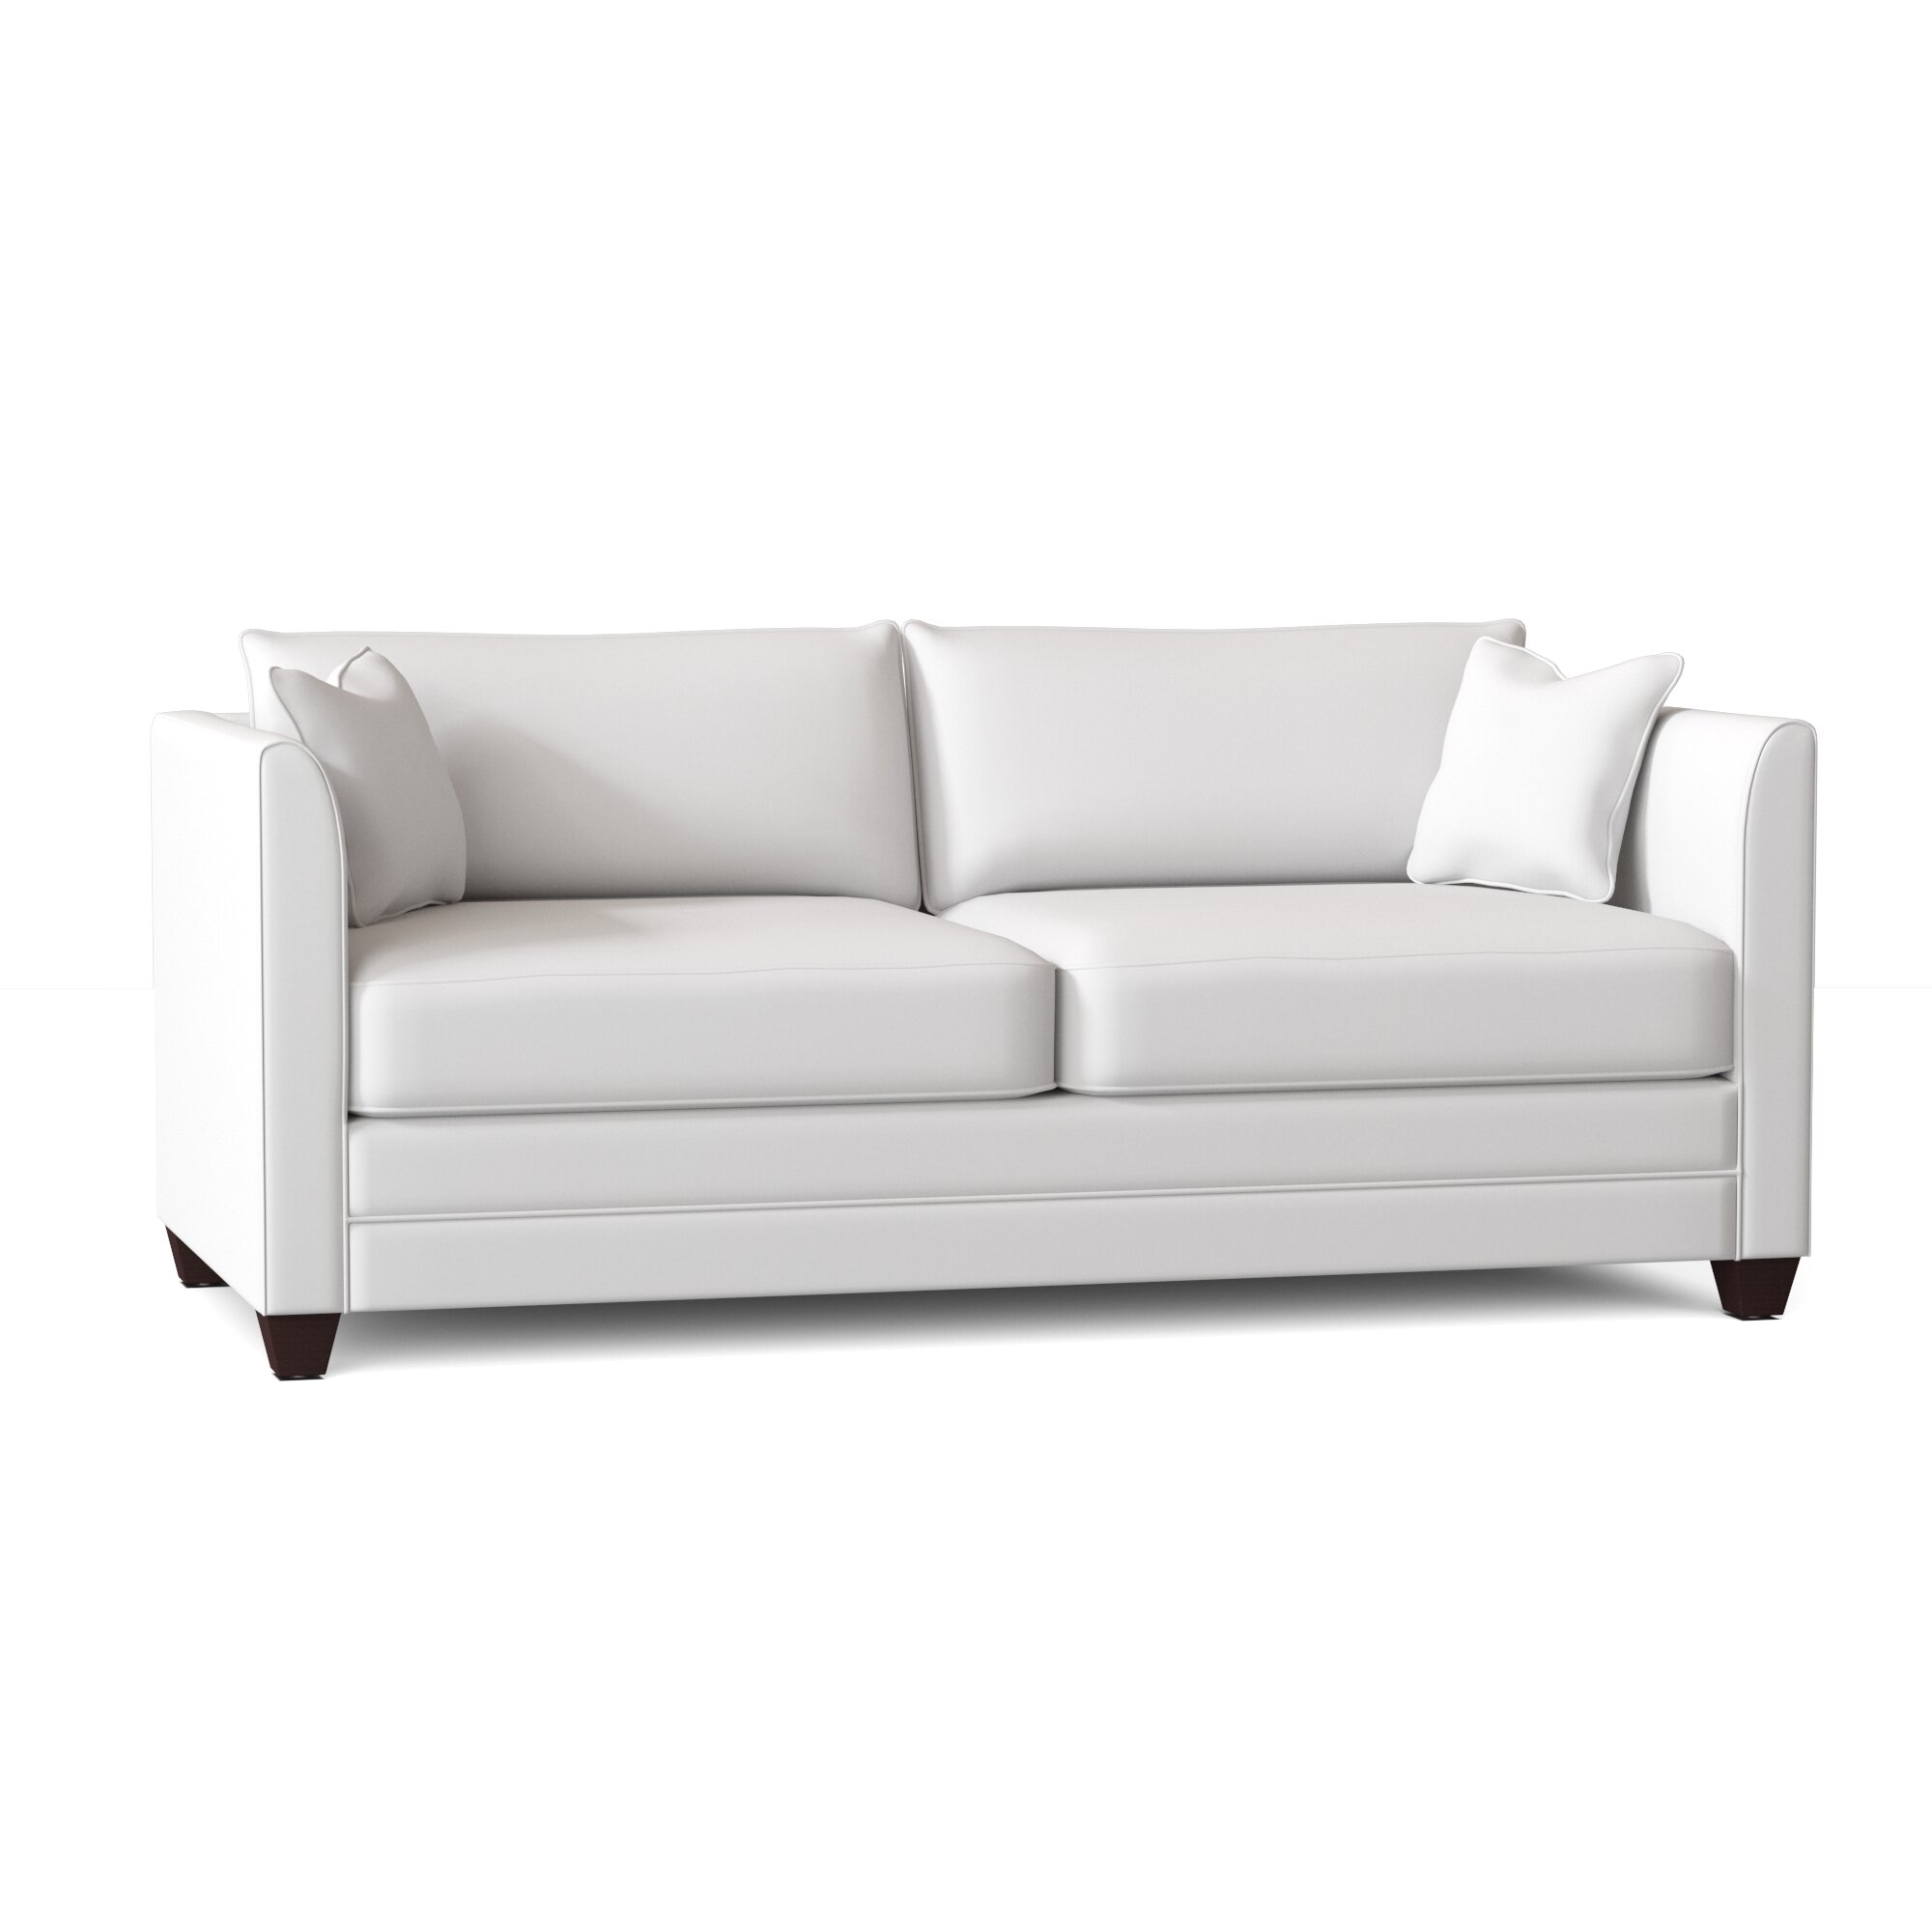 Lourenco 77” Square Arm Sofa Bed with Reversible Cushions